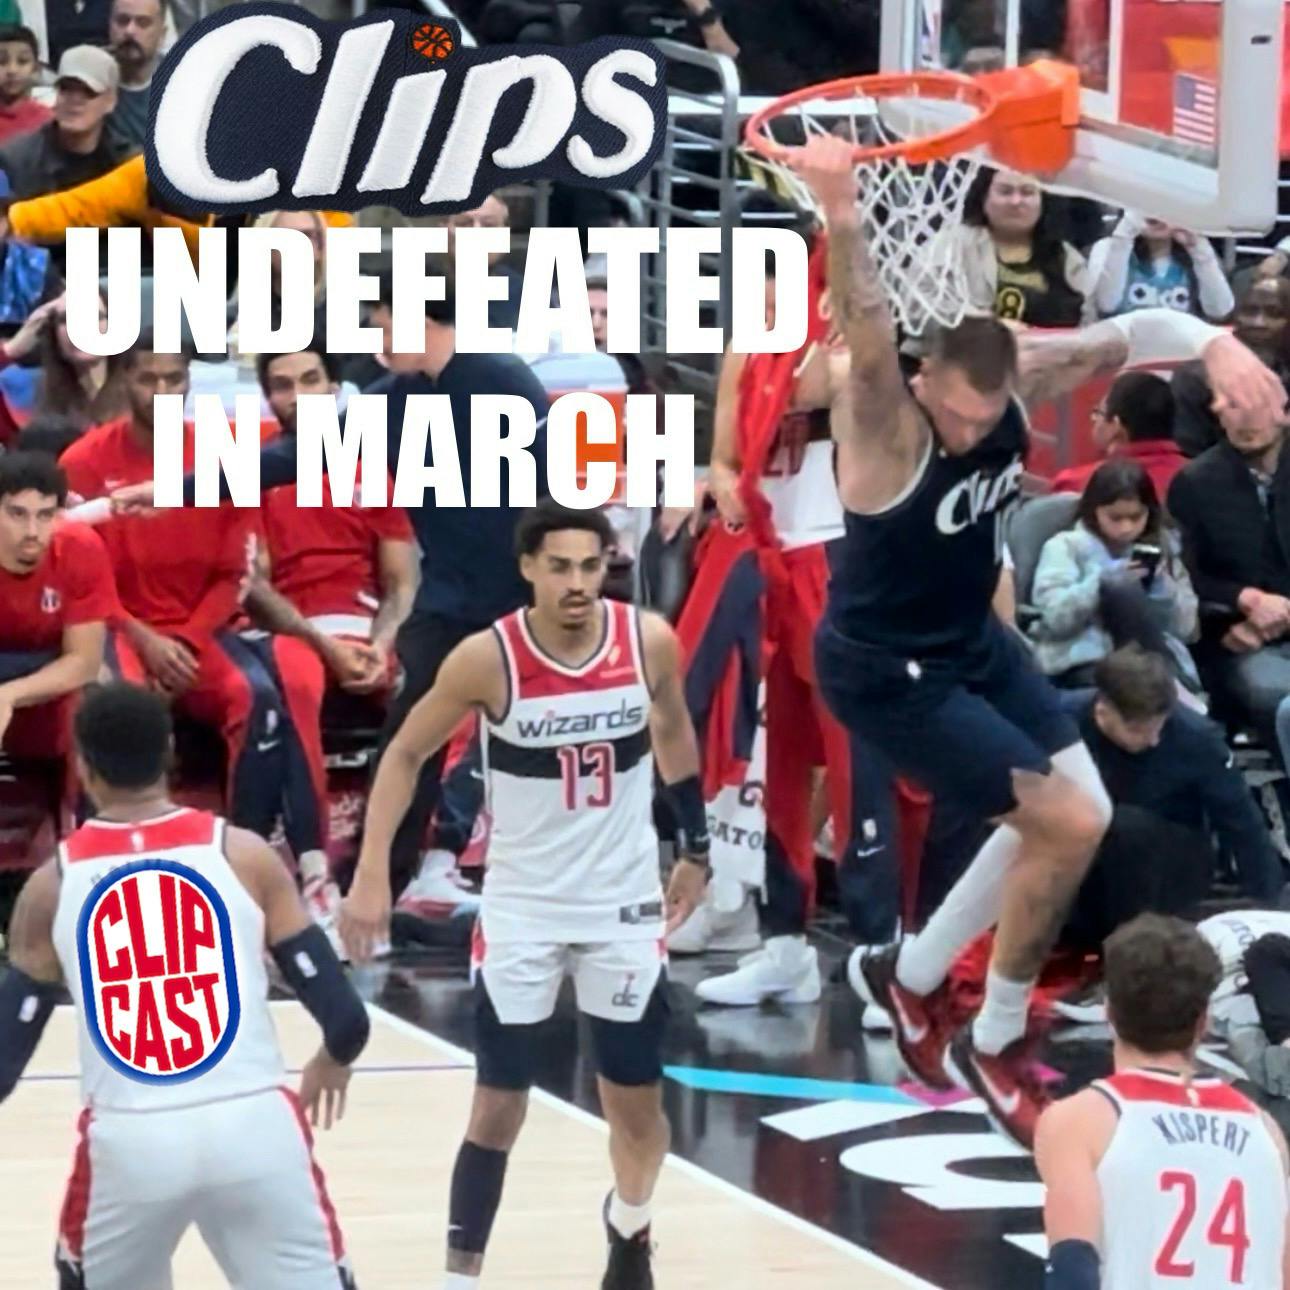 Clippers Undefeated in March